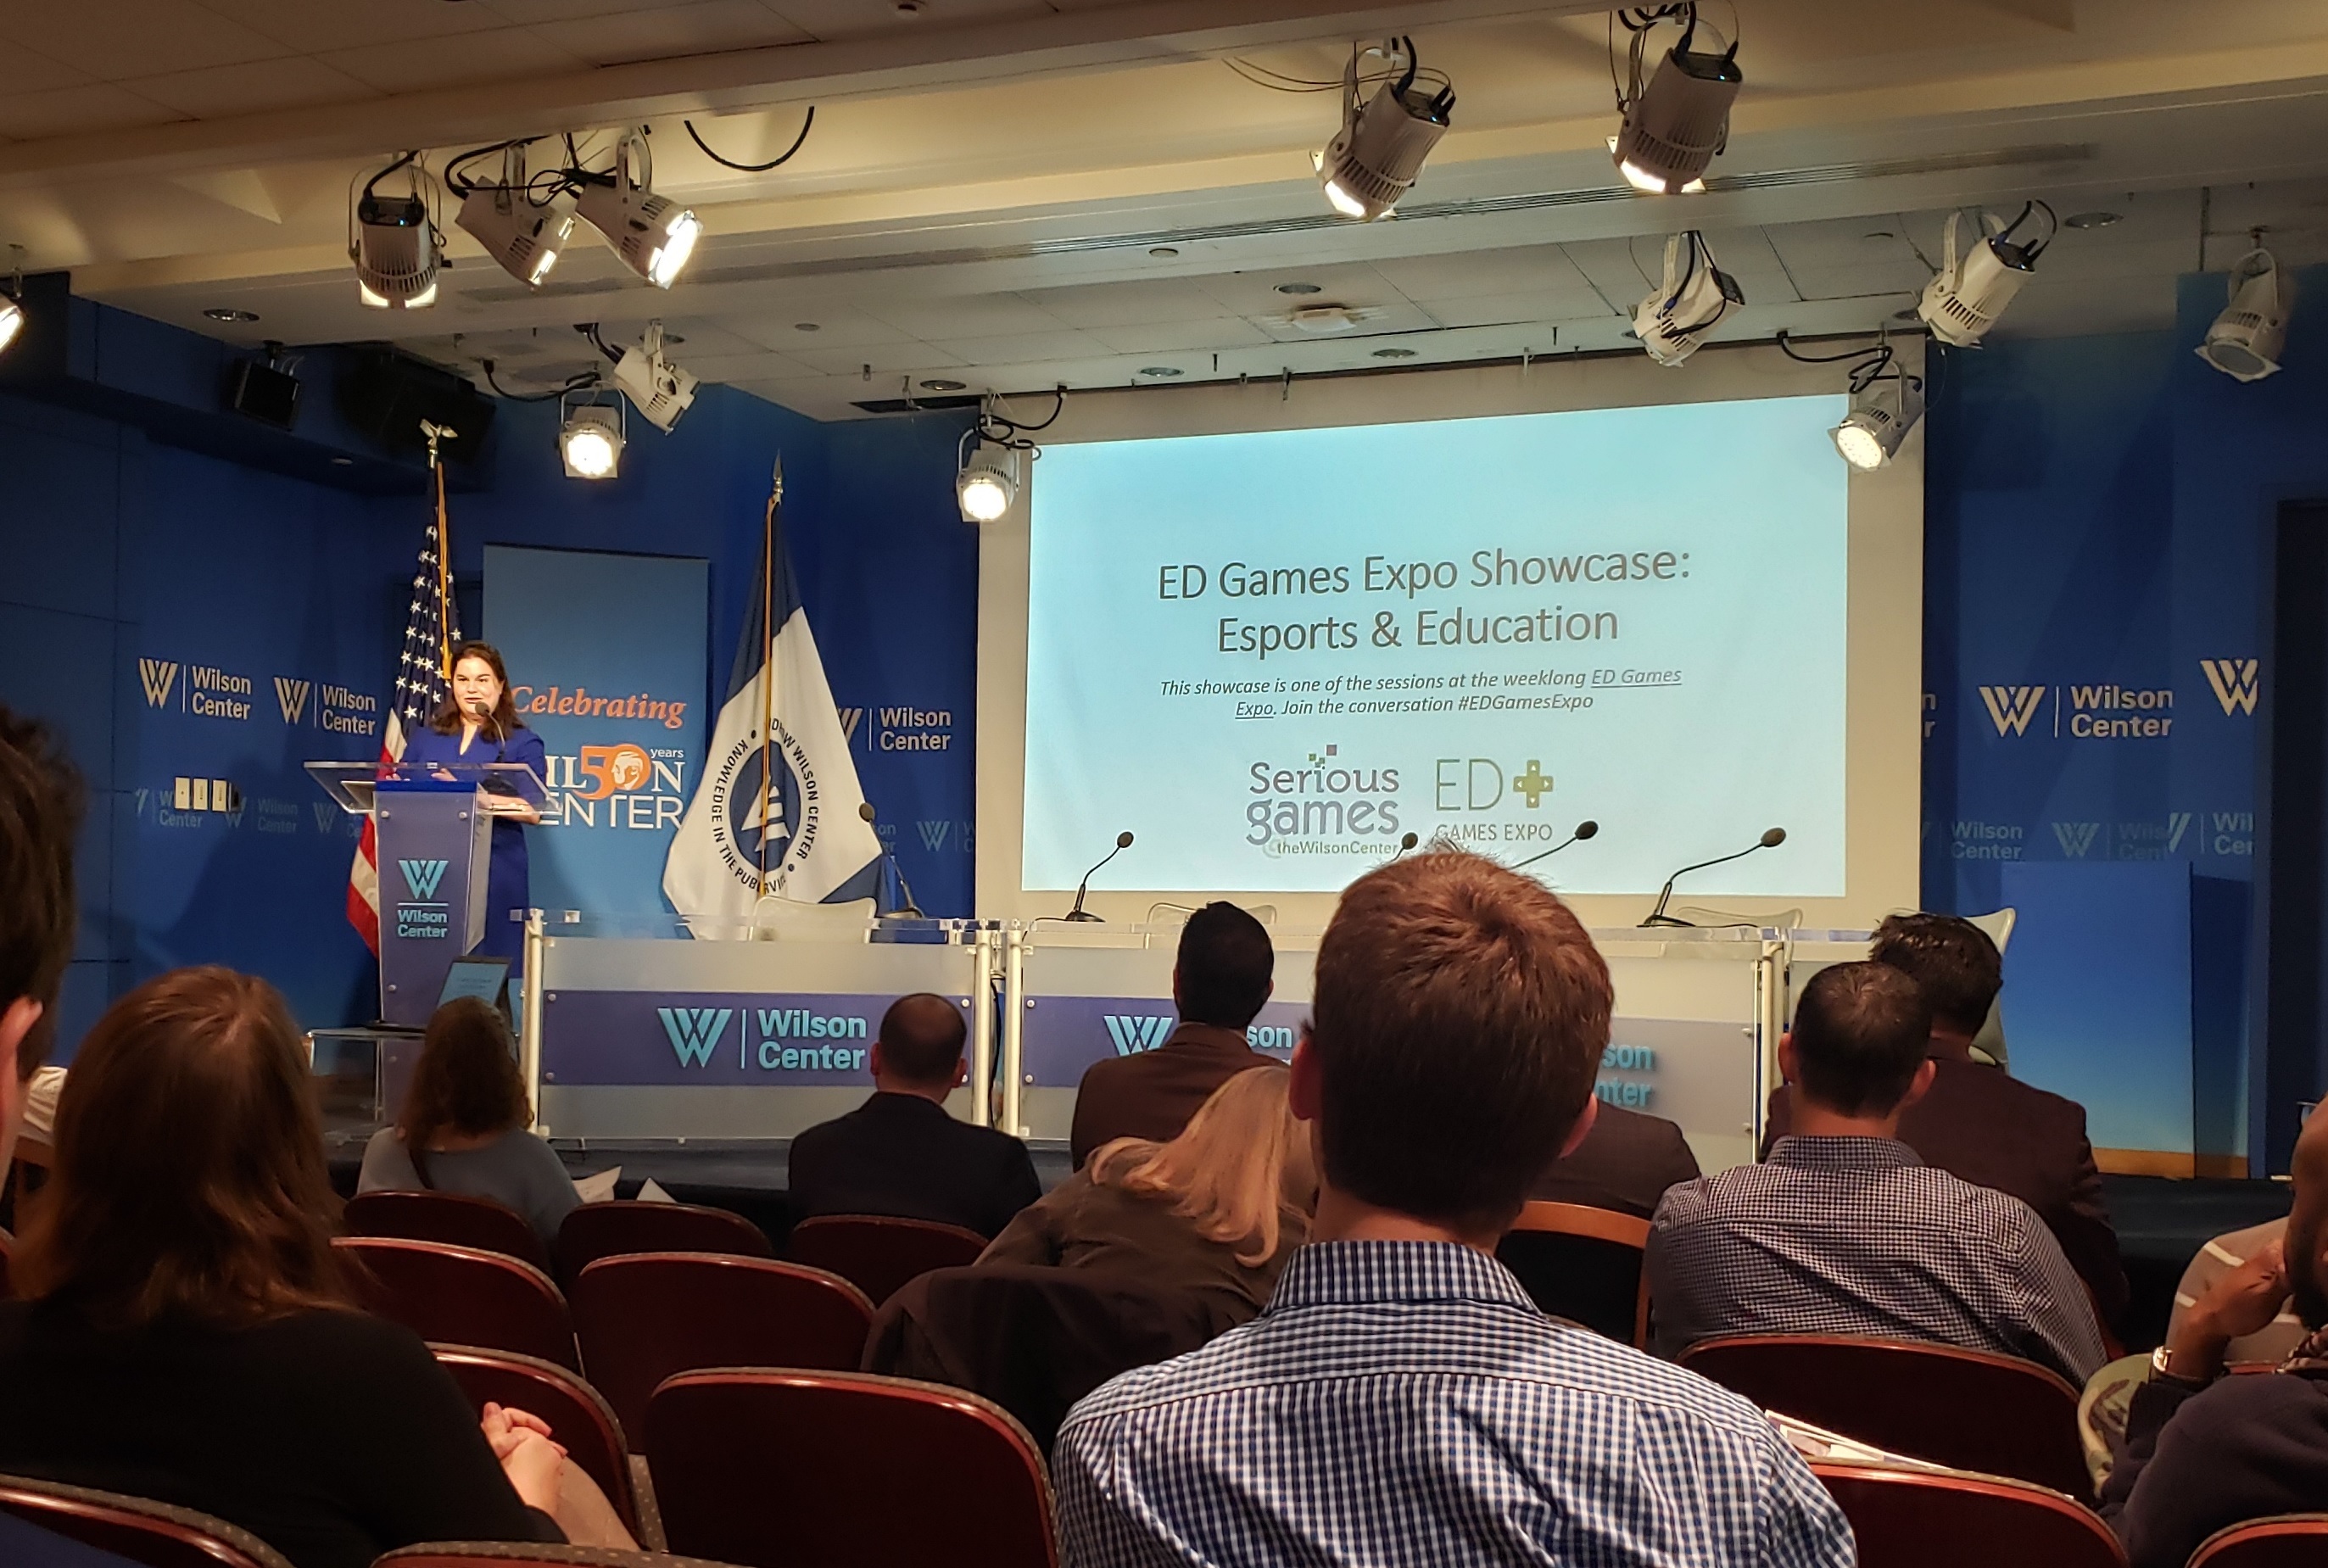 Intergalactic Education's Justin Park attends Dept of Education Games Expo Showcase